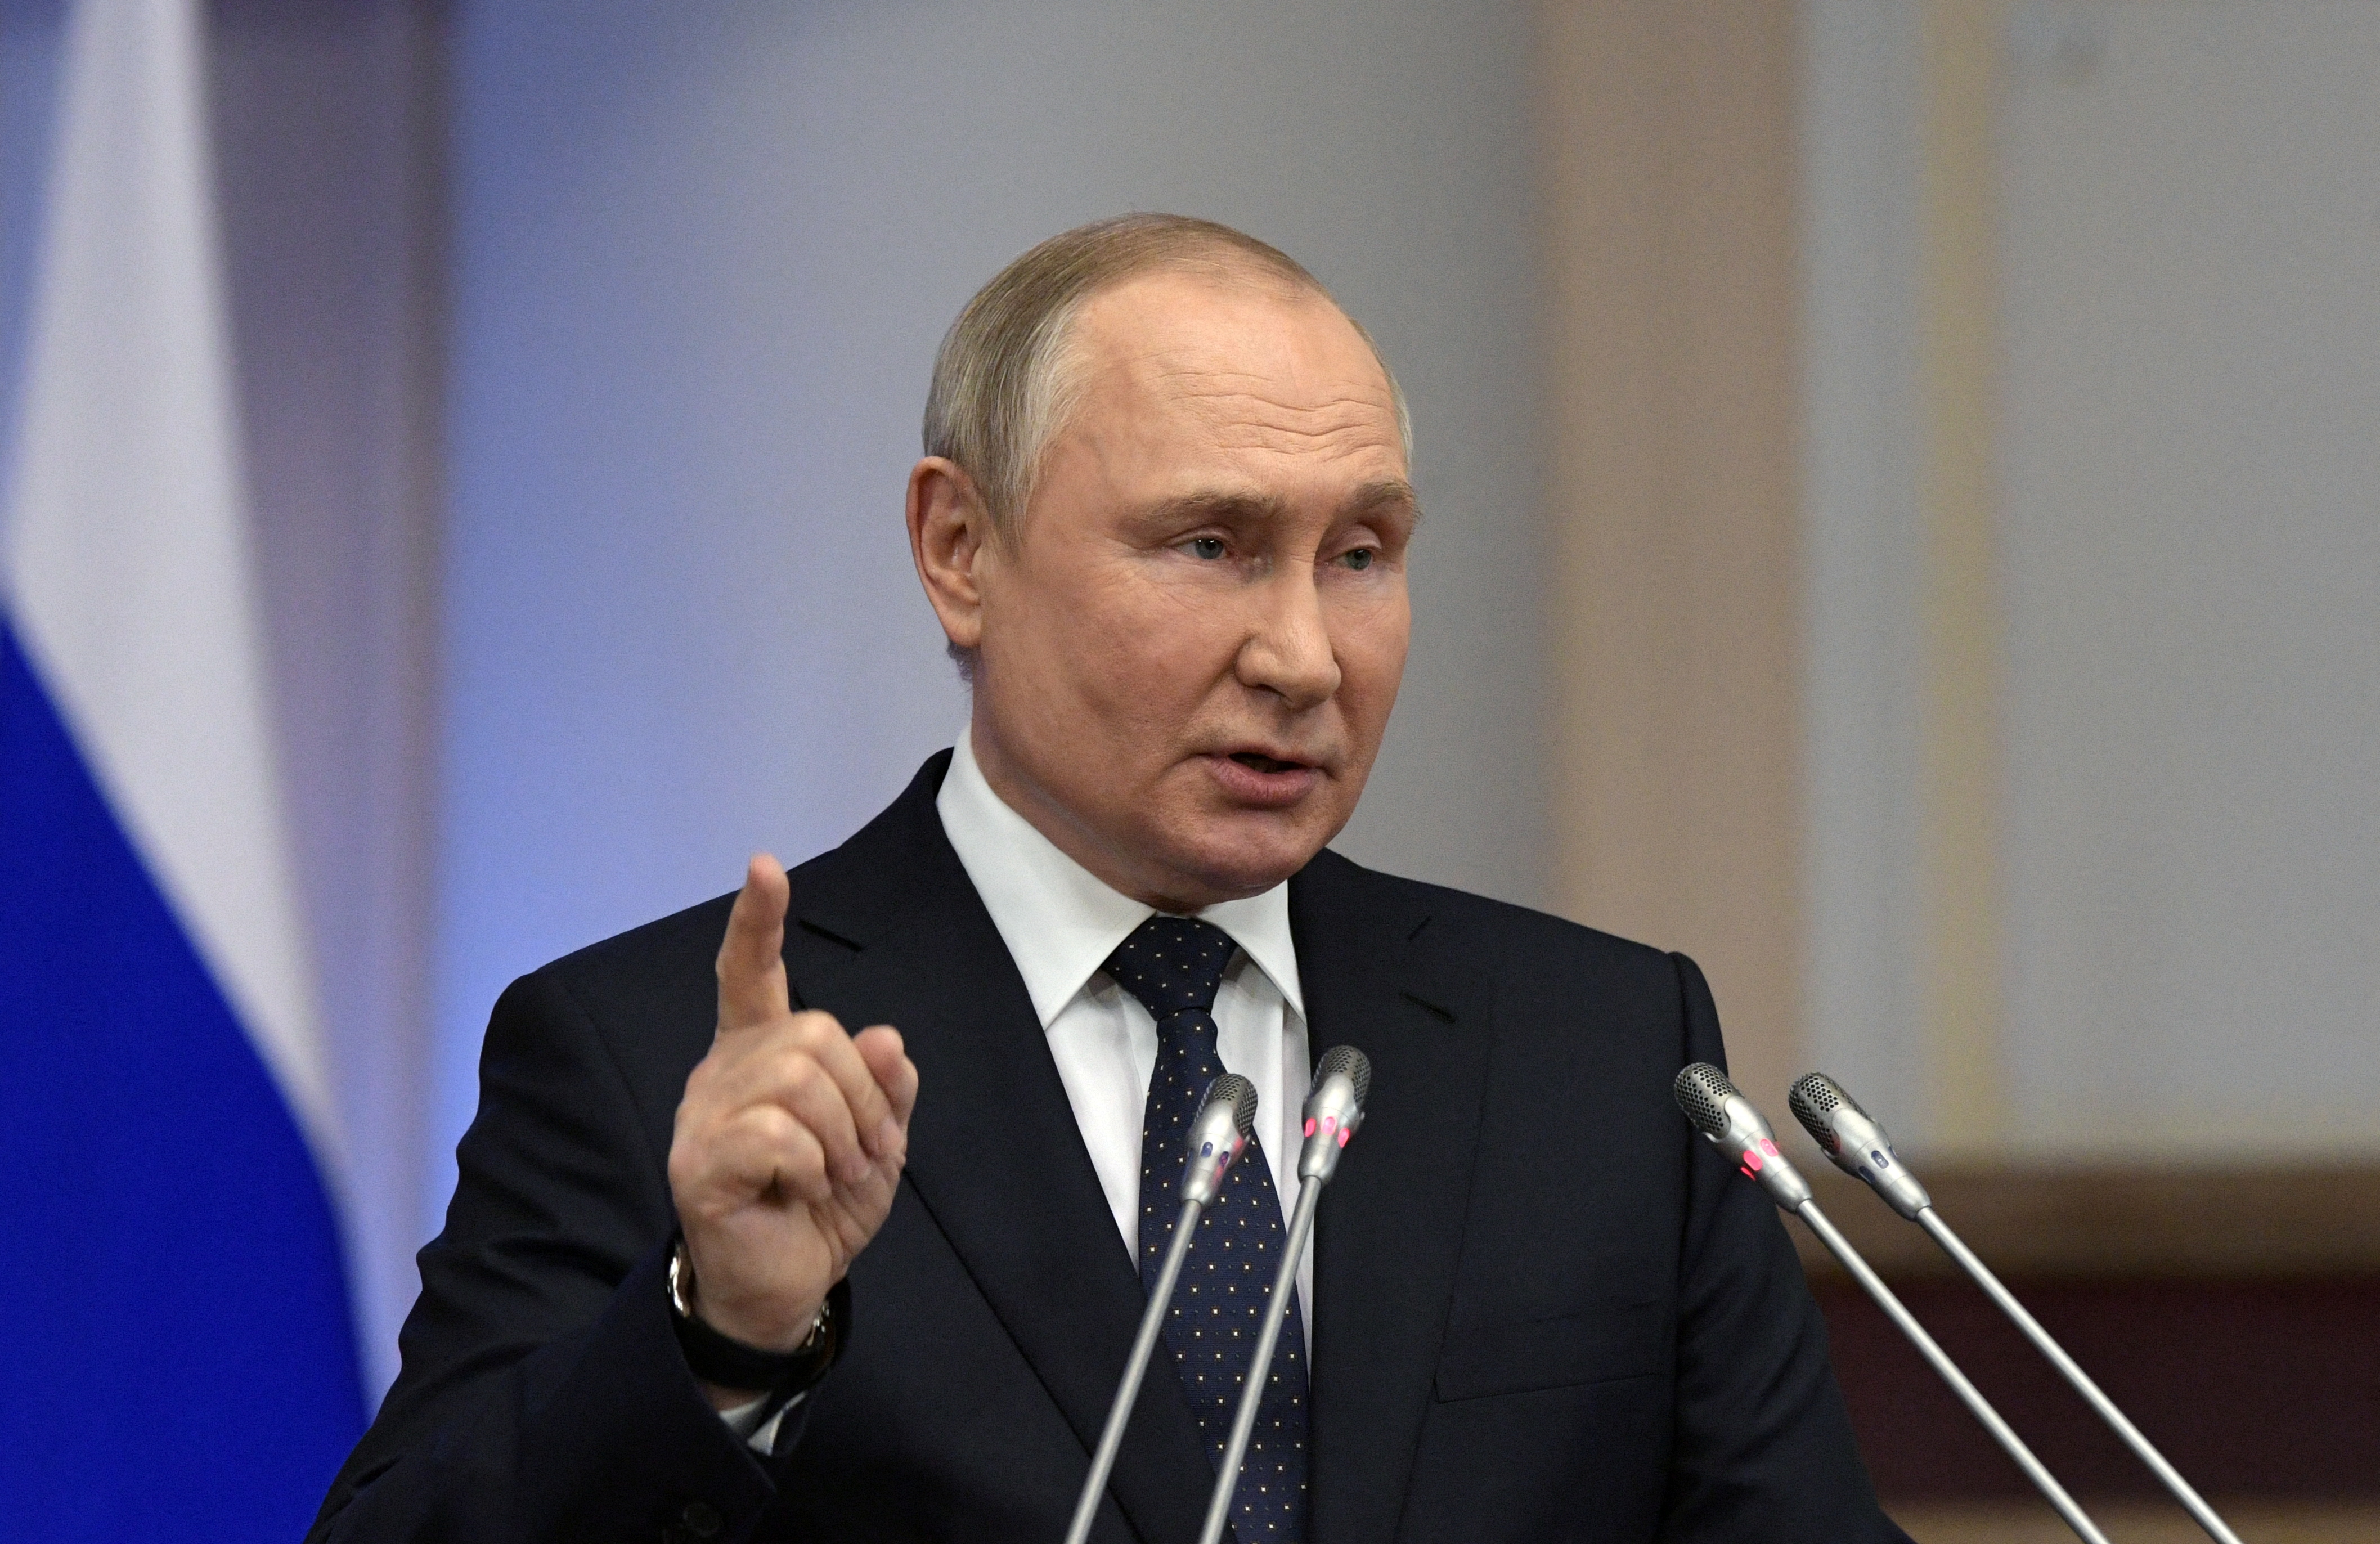 Putin puts West on notice: Moscow can terminate exports and deals | Reuters